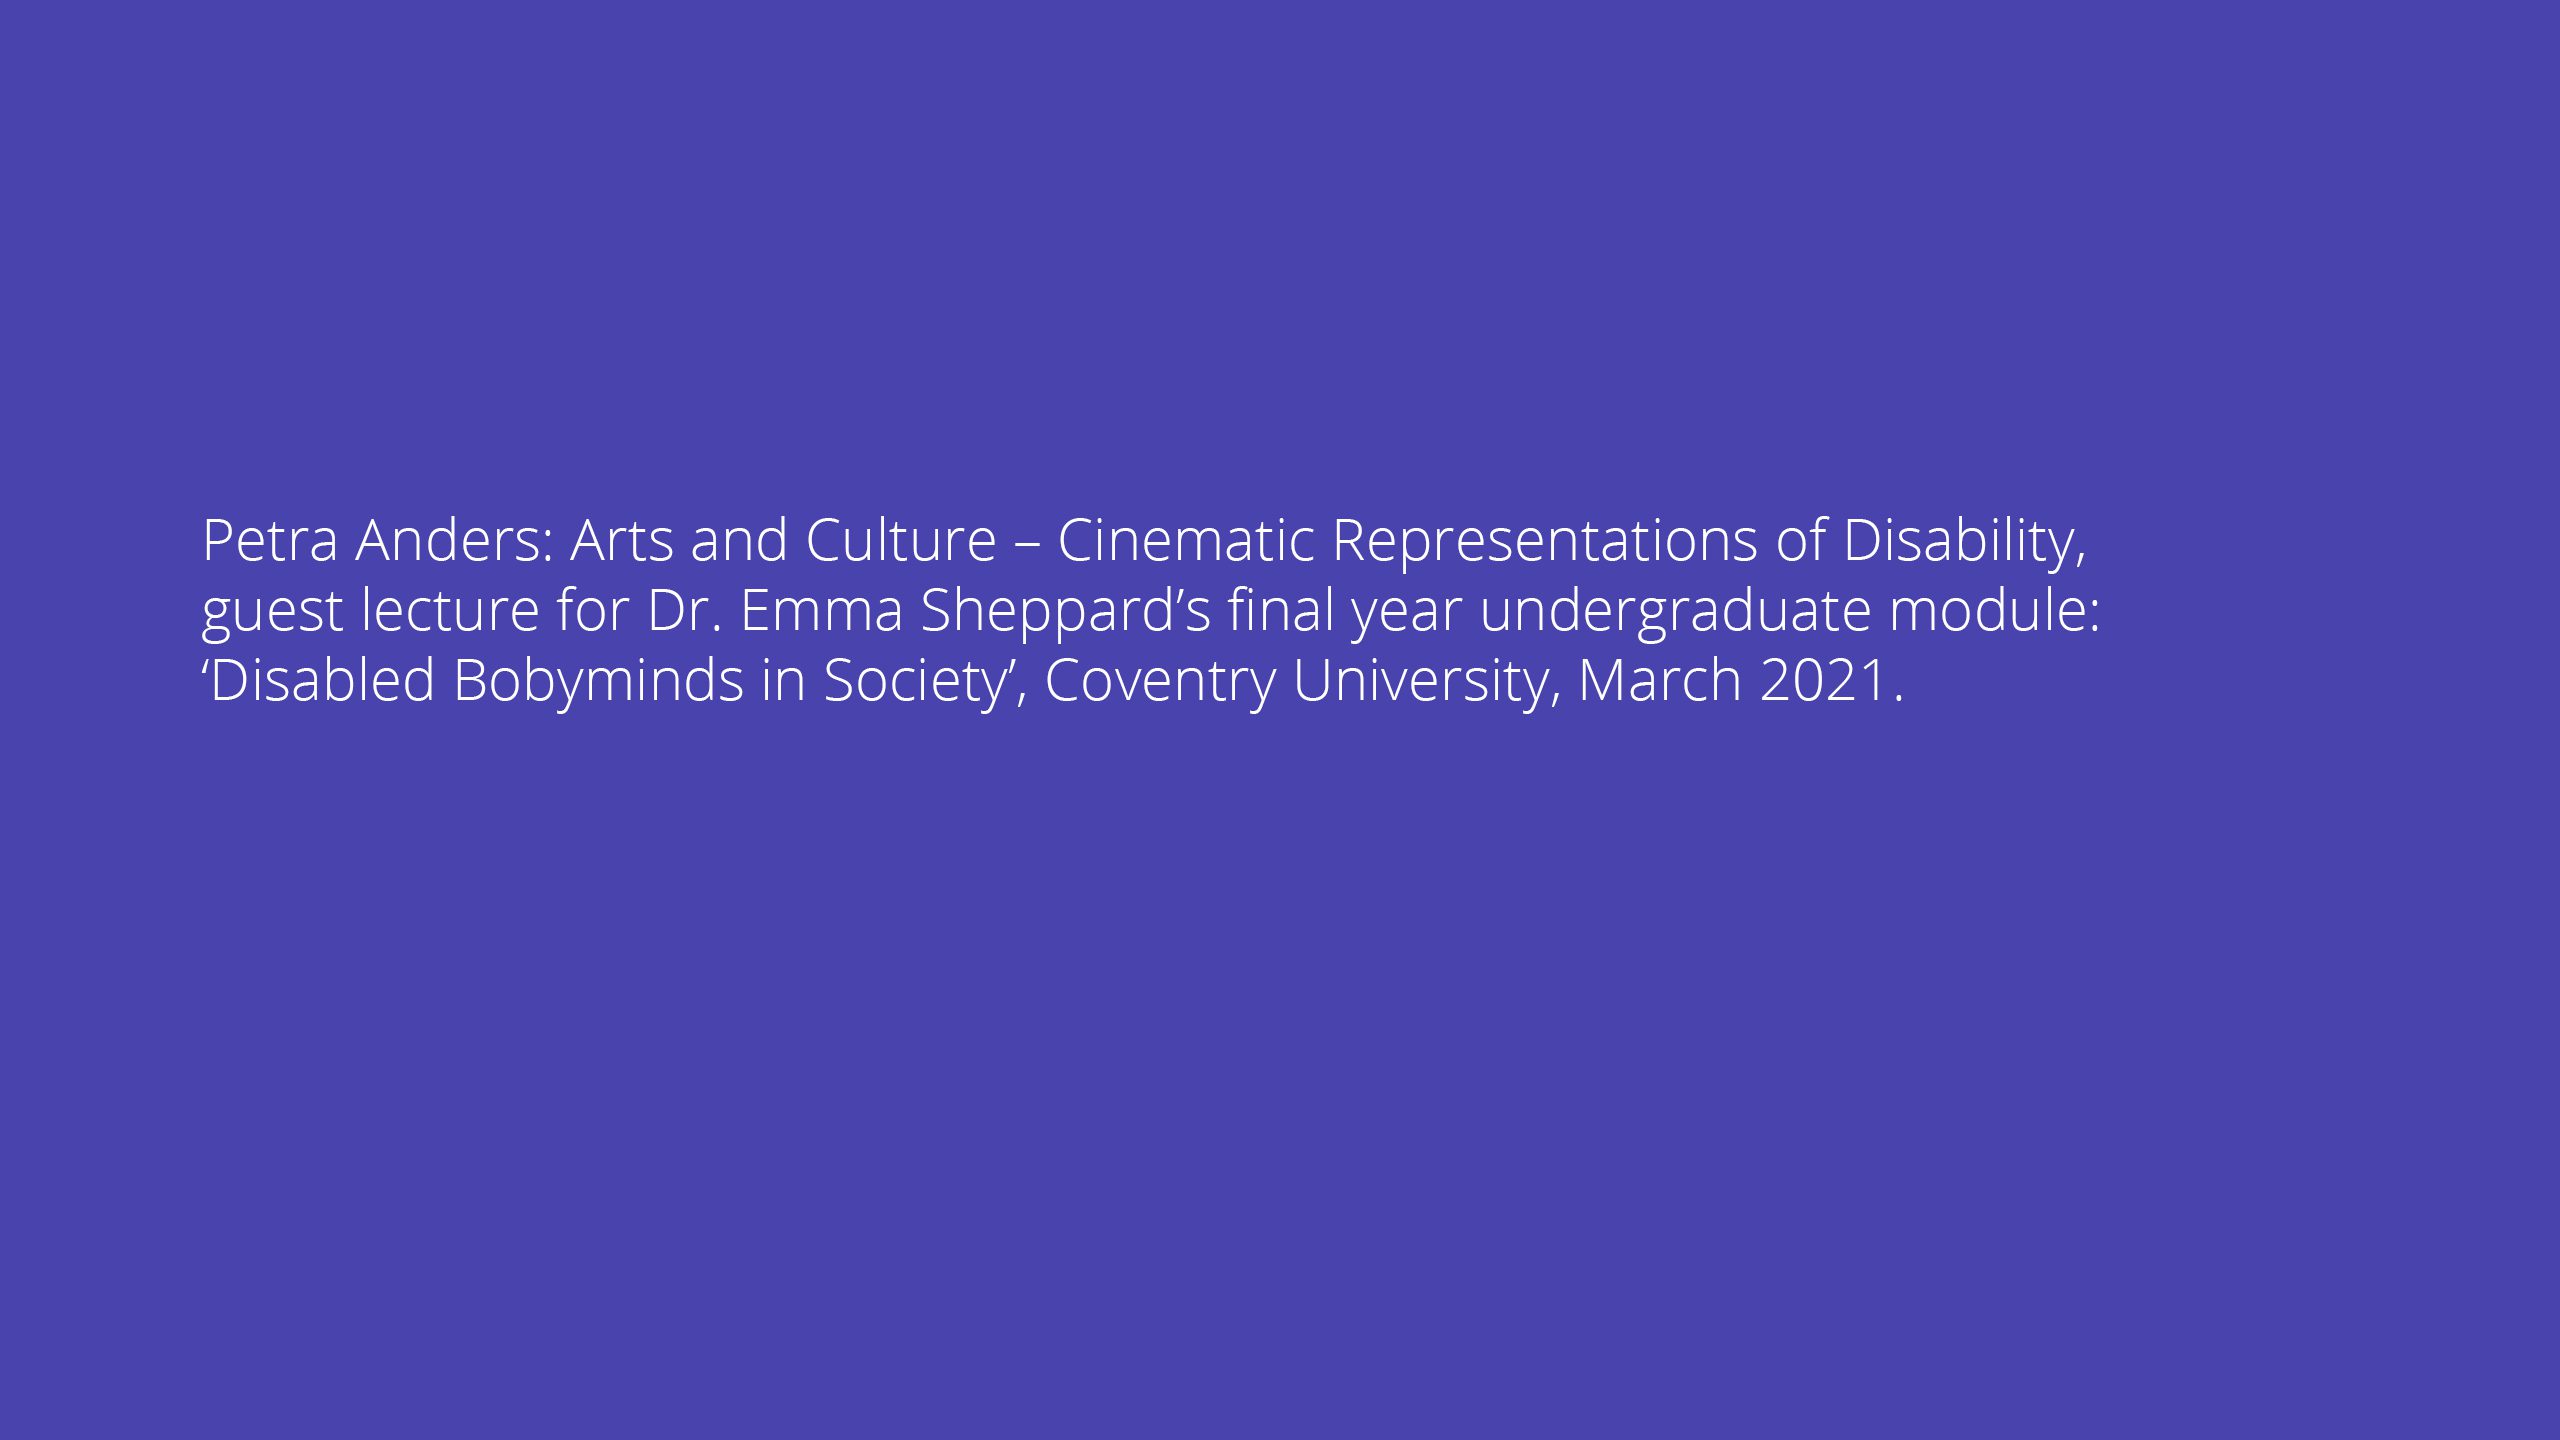 Petra Anders: Arts and Culture – Cinematic Representations of Disability, guest lecture for Dr. Emma Sheppard’s final year undergraduate module: ‘Disabled Bobyminds in Society’, Coventry University, March 2021.